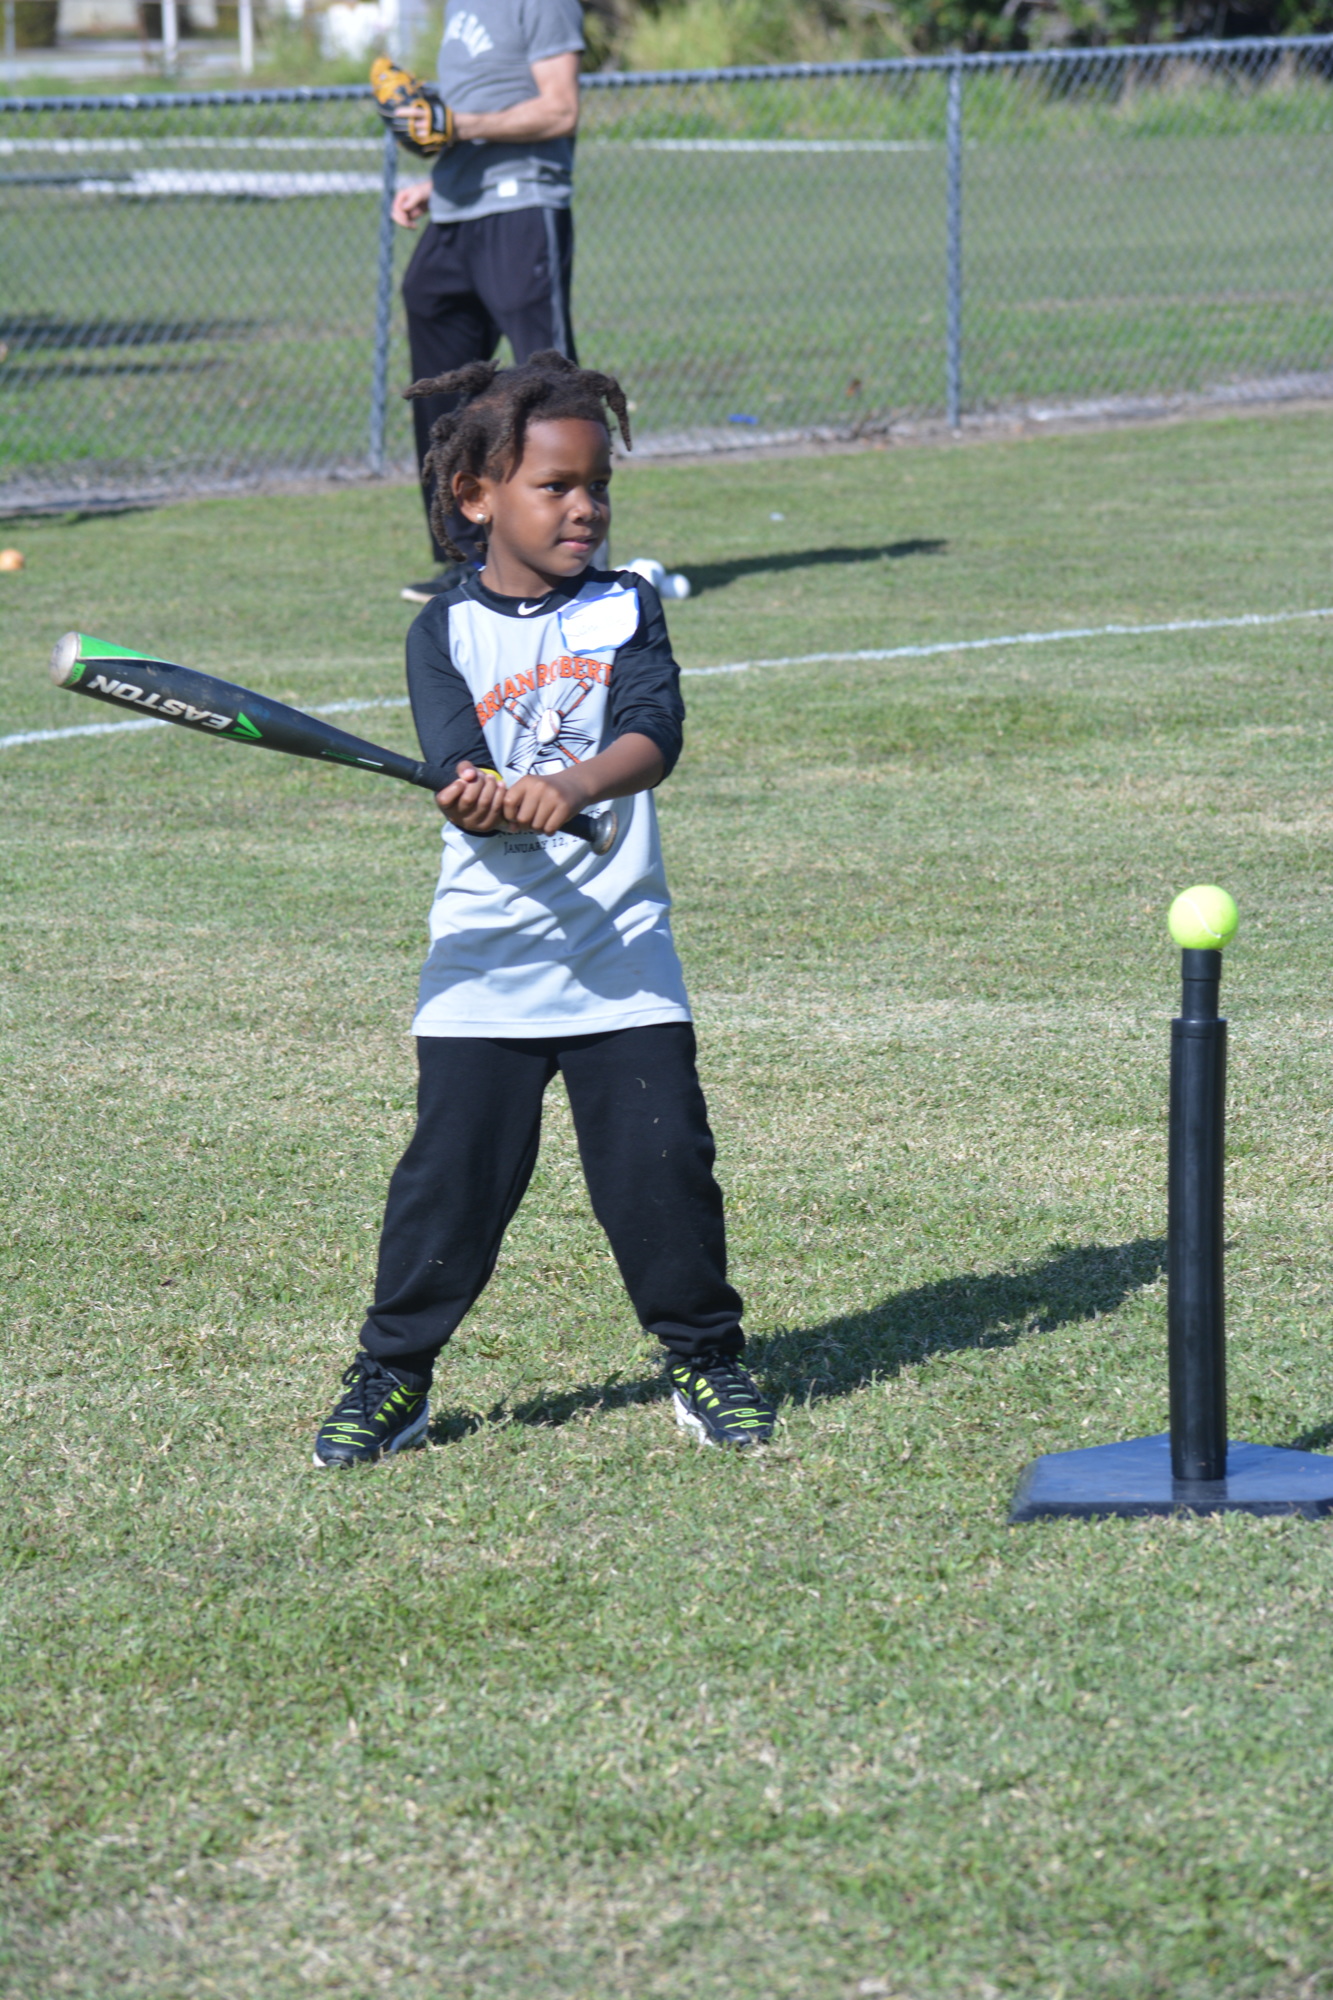 Jamille Brown, 5, readies to take a big swing at the tee ball station during the clinic.